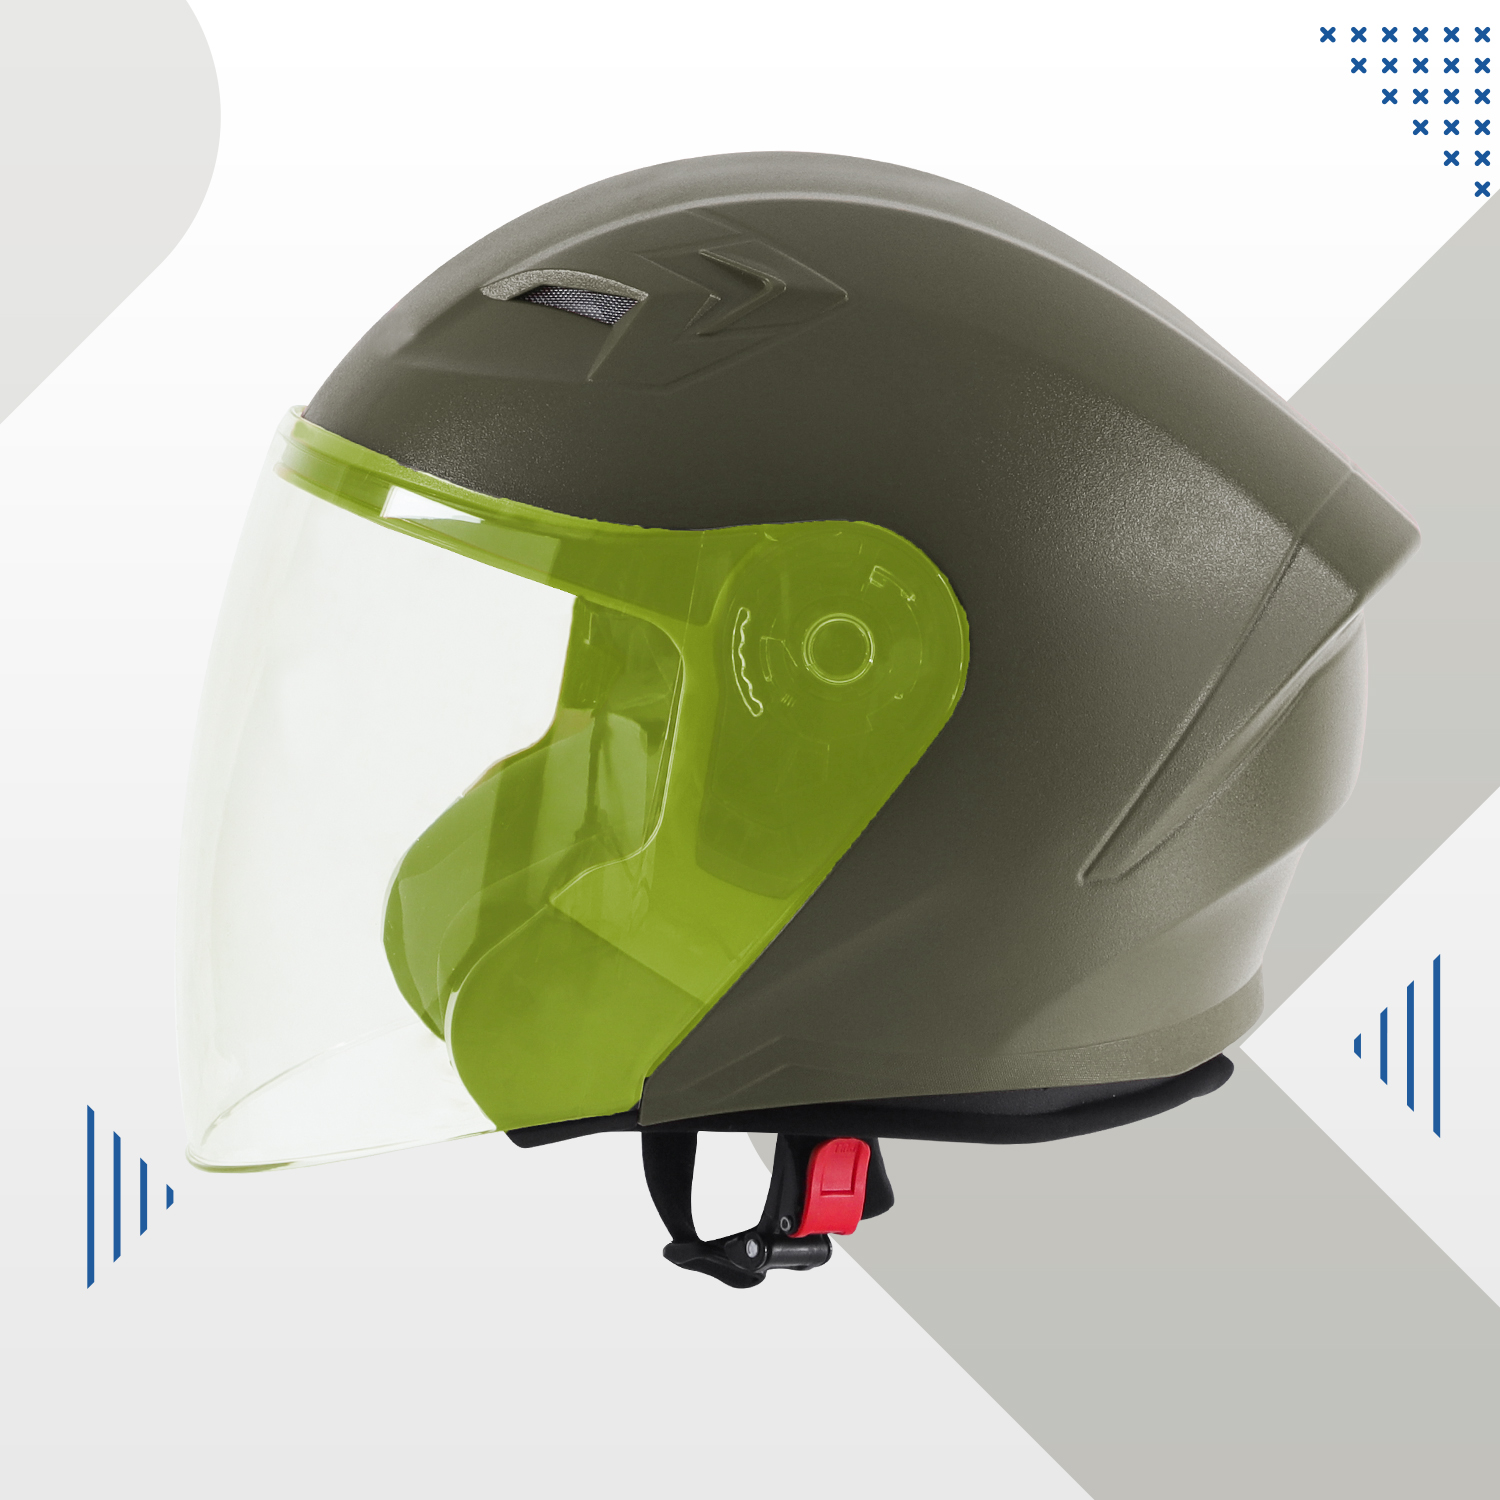 Steelbird SBA-17 7Wings ISI Certified Open Face Helmet For Men And Women (Dashing Battle Green With Tinted Yellow Visor)